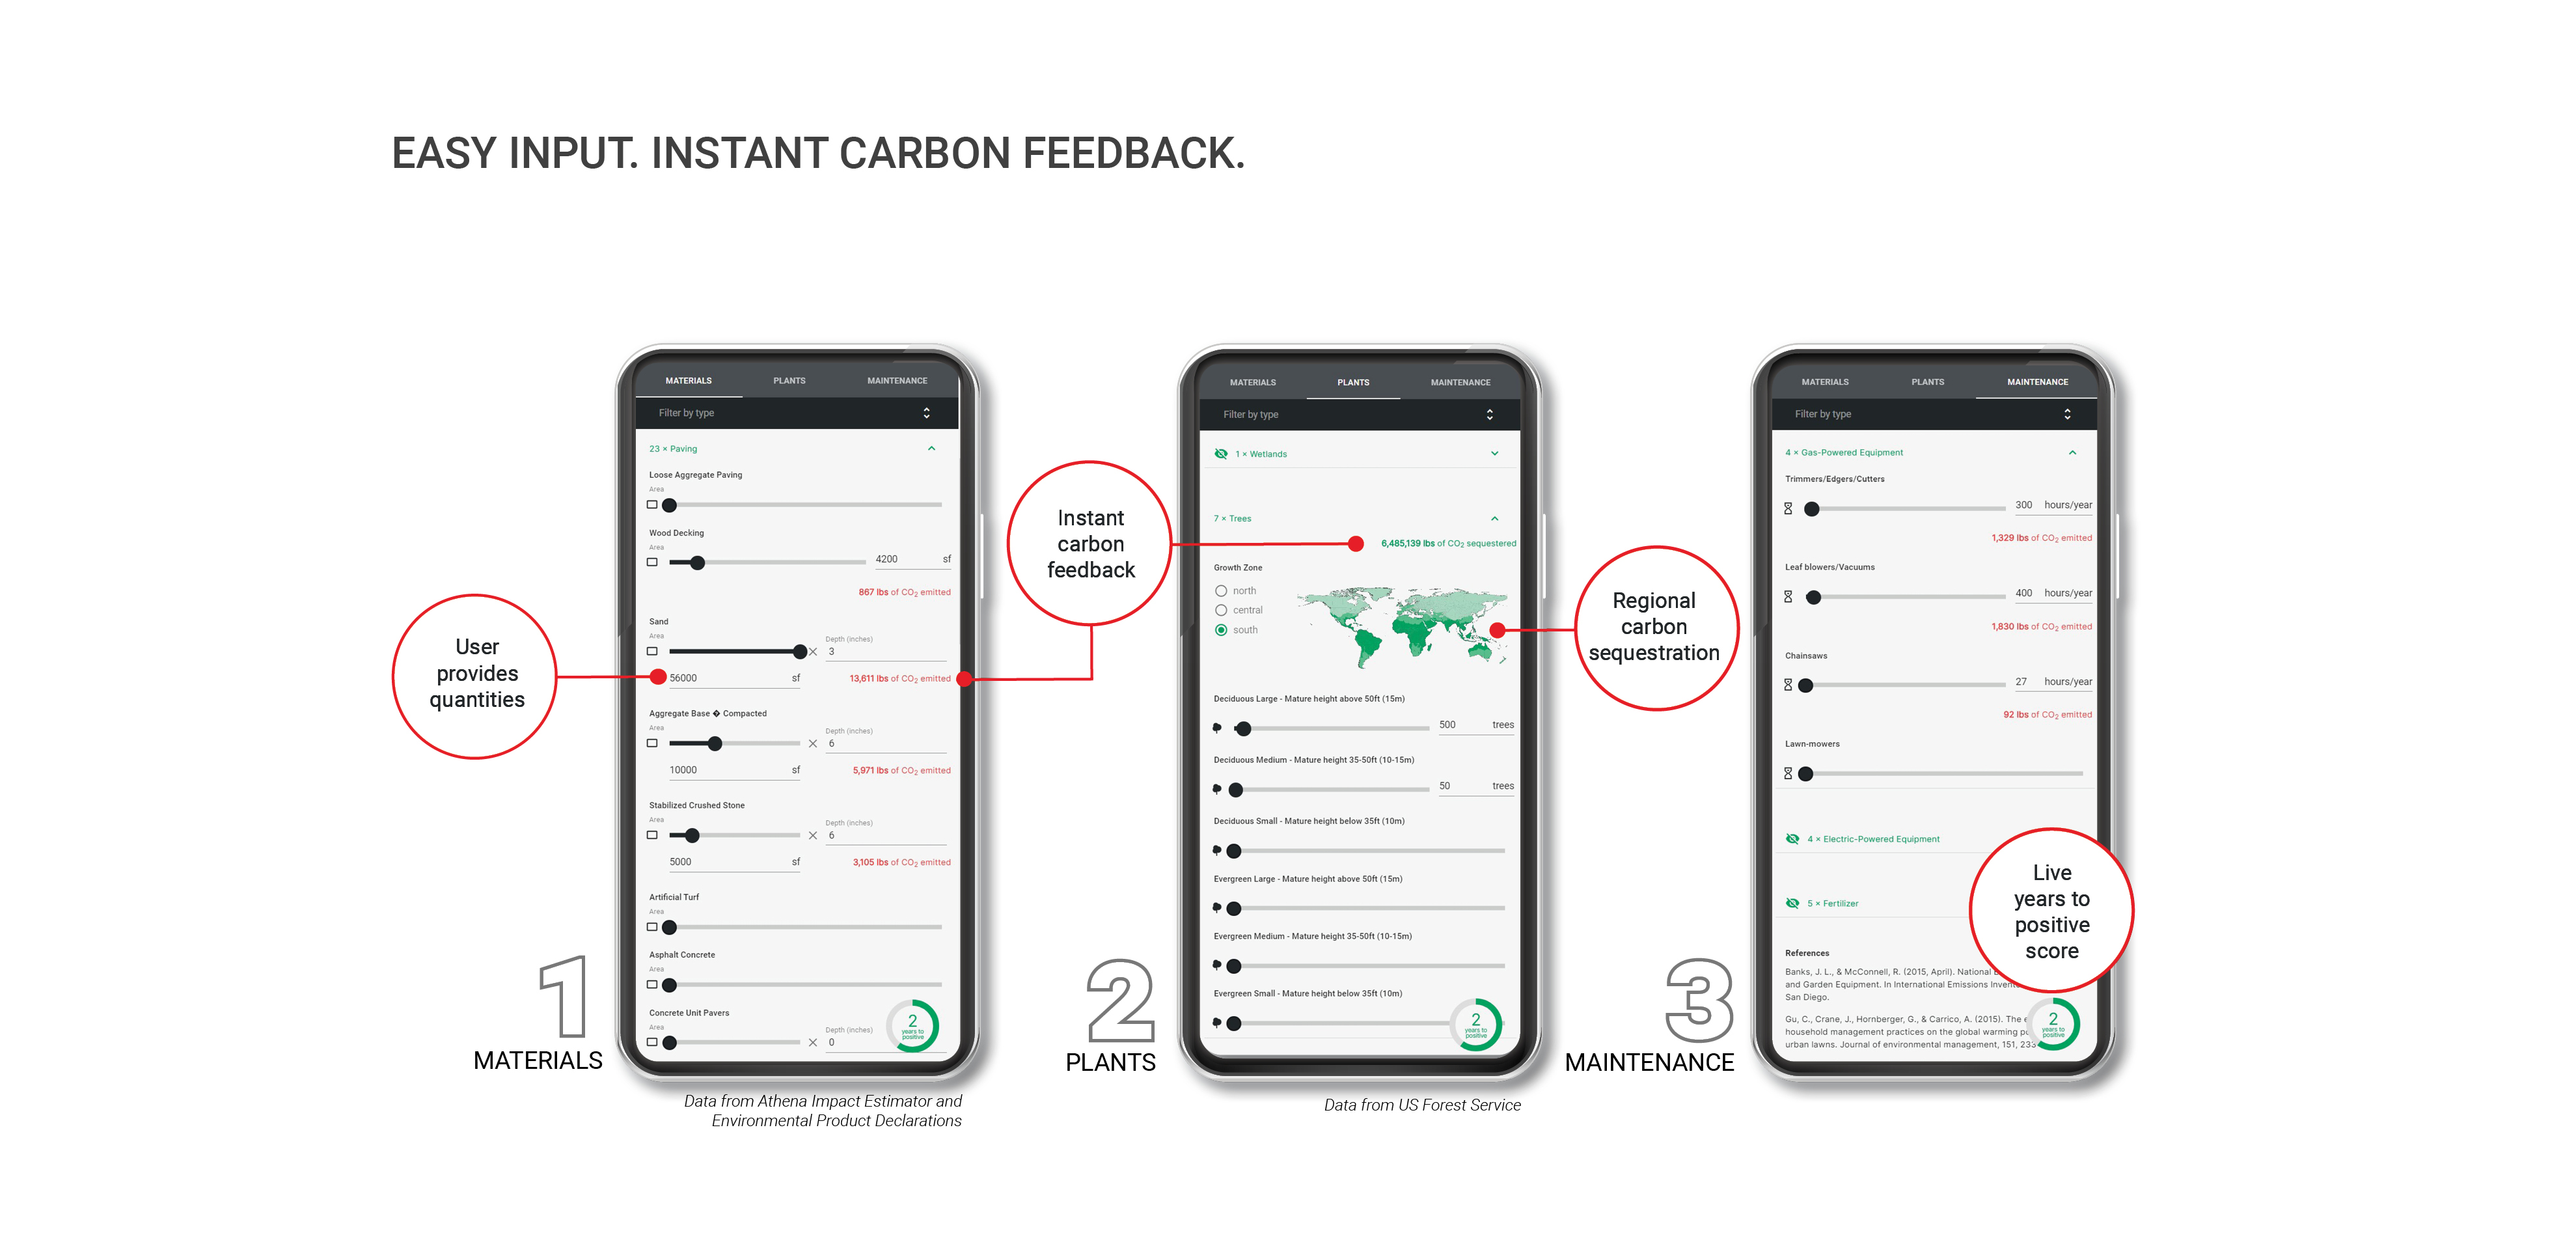 Easy Input. Instant Carbon Feedback.